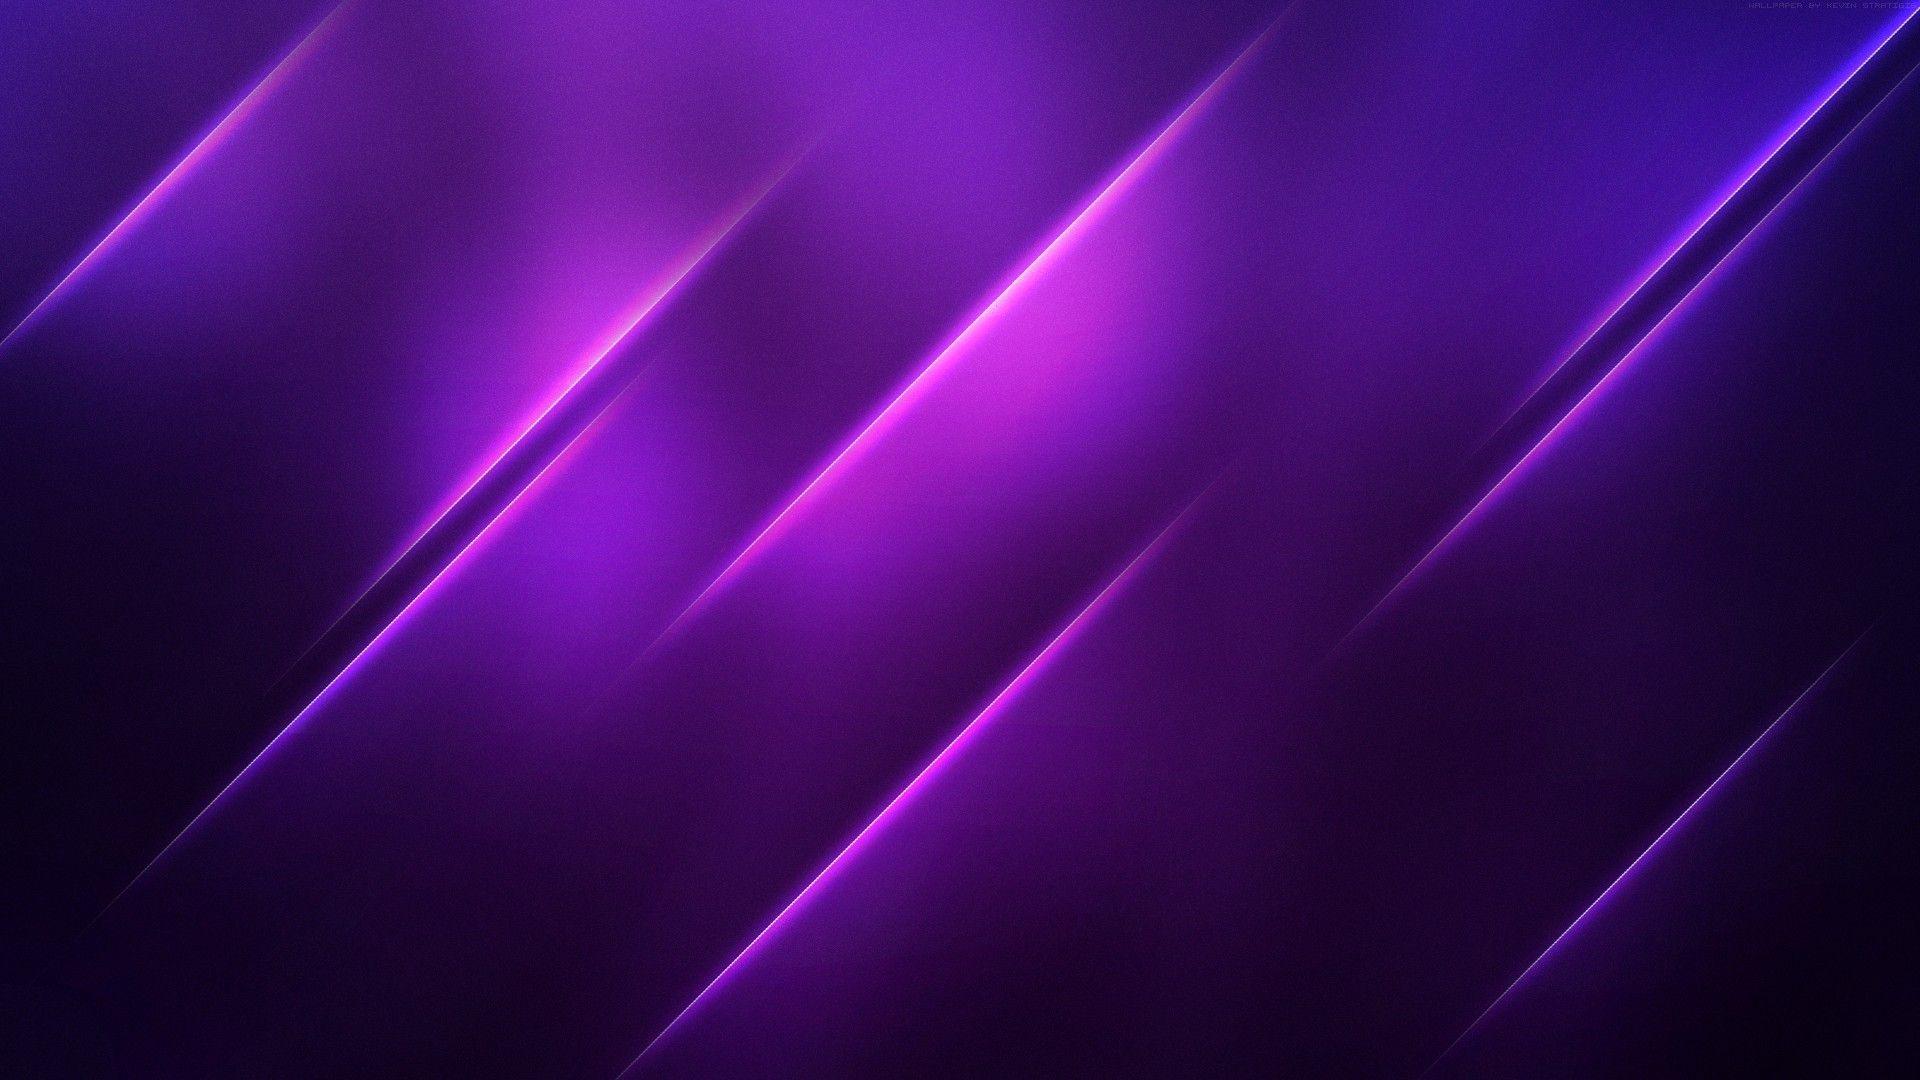 Violet Color Wallpaper, High Definition, High Quality, Widescreen